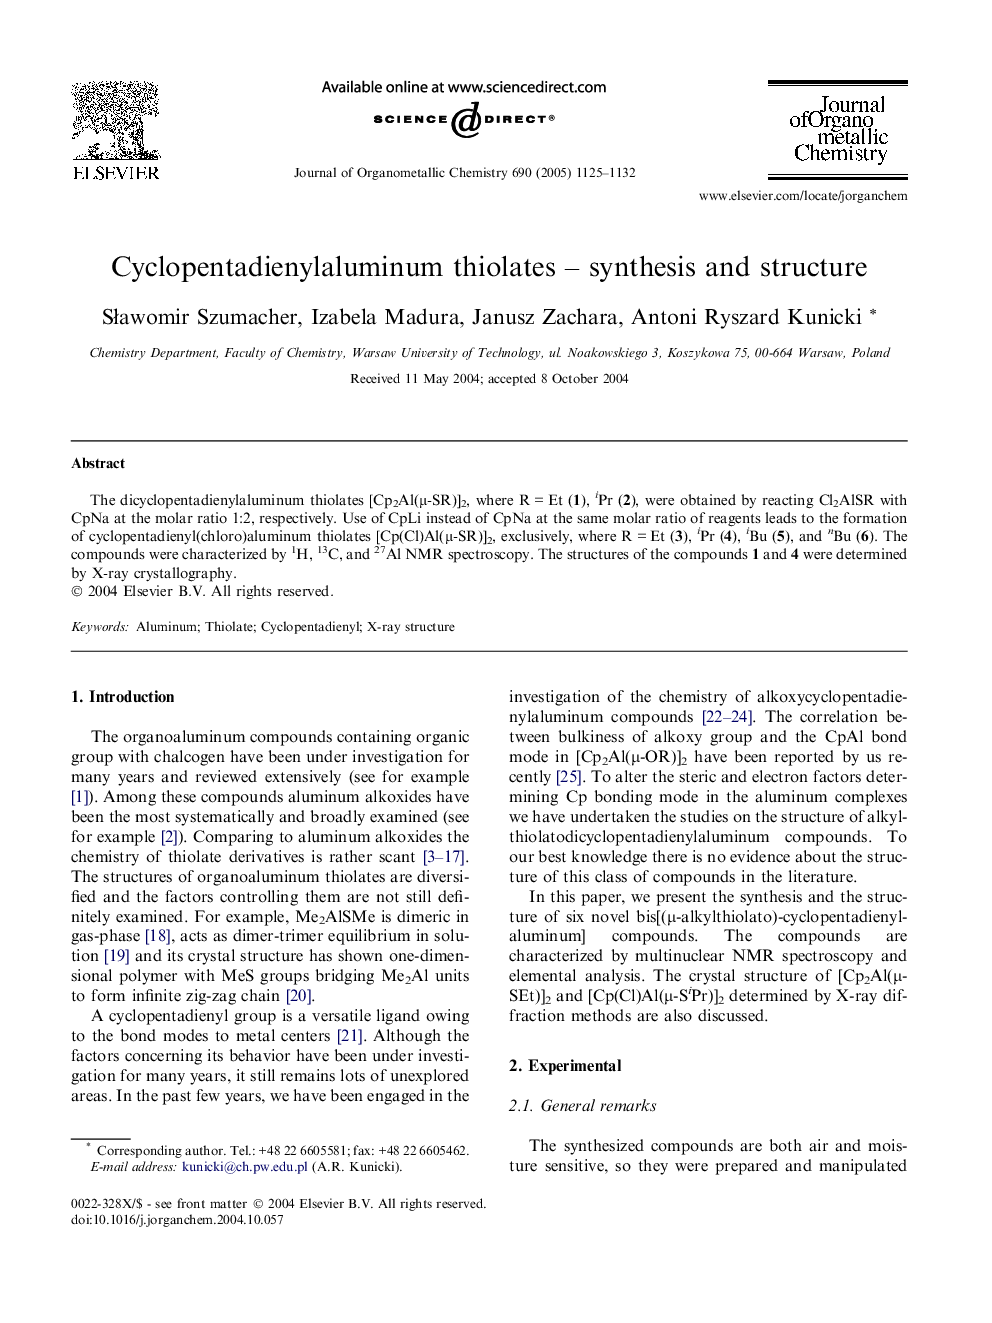 Cyclopentadienylaluminum thiolates - synthesis and structure